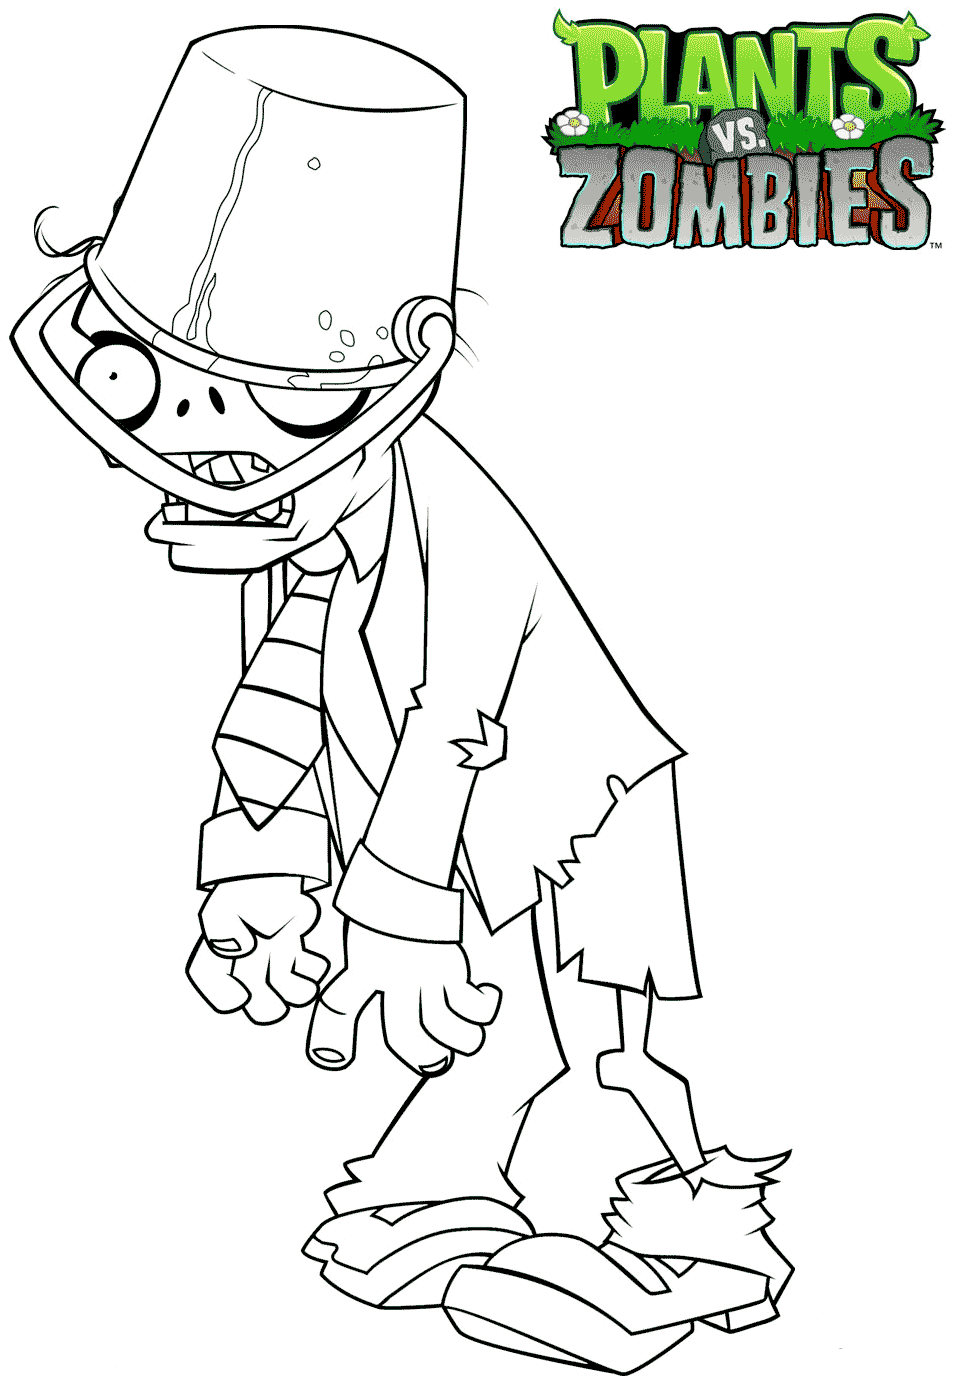 Plants vs Zombies Coloring Pages Buckethead Zombie